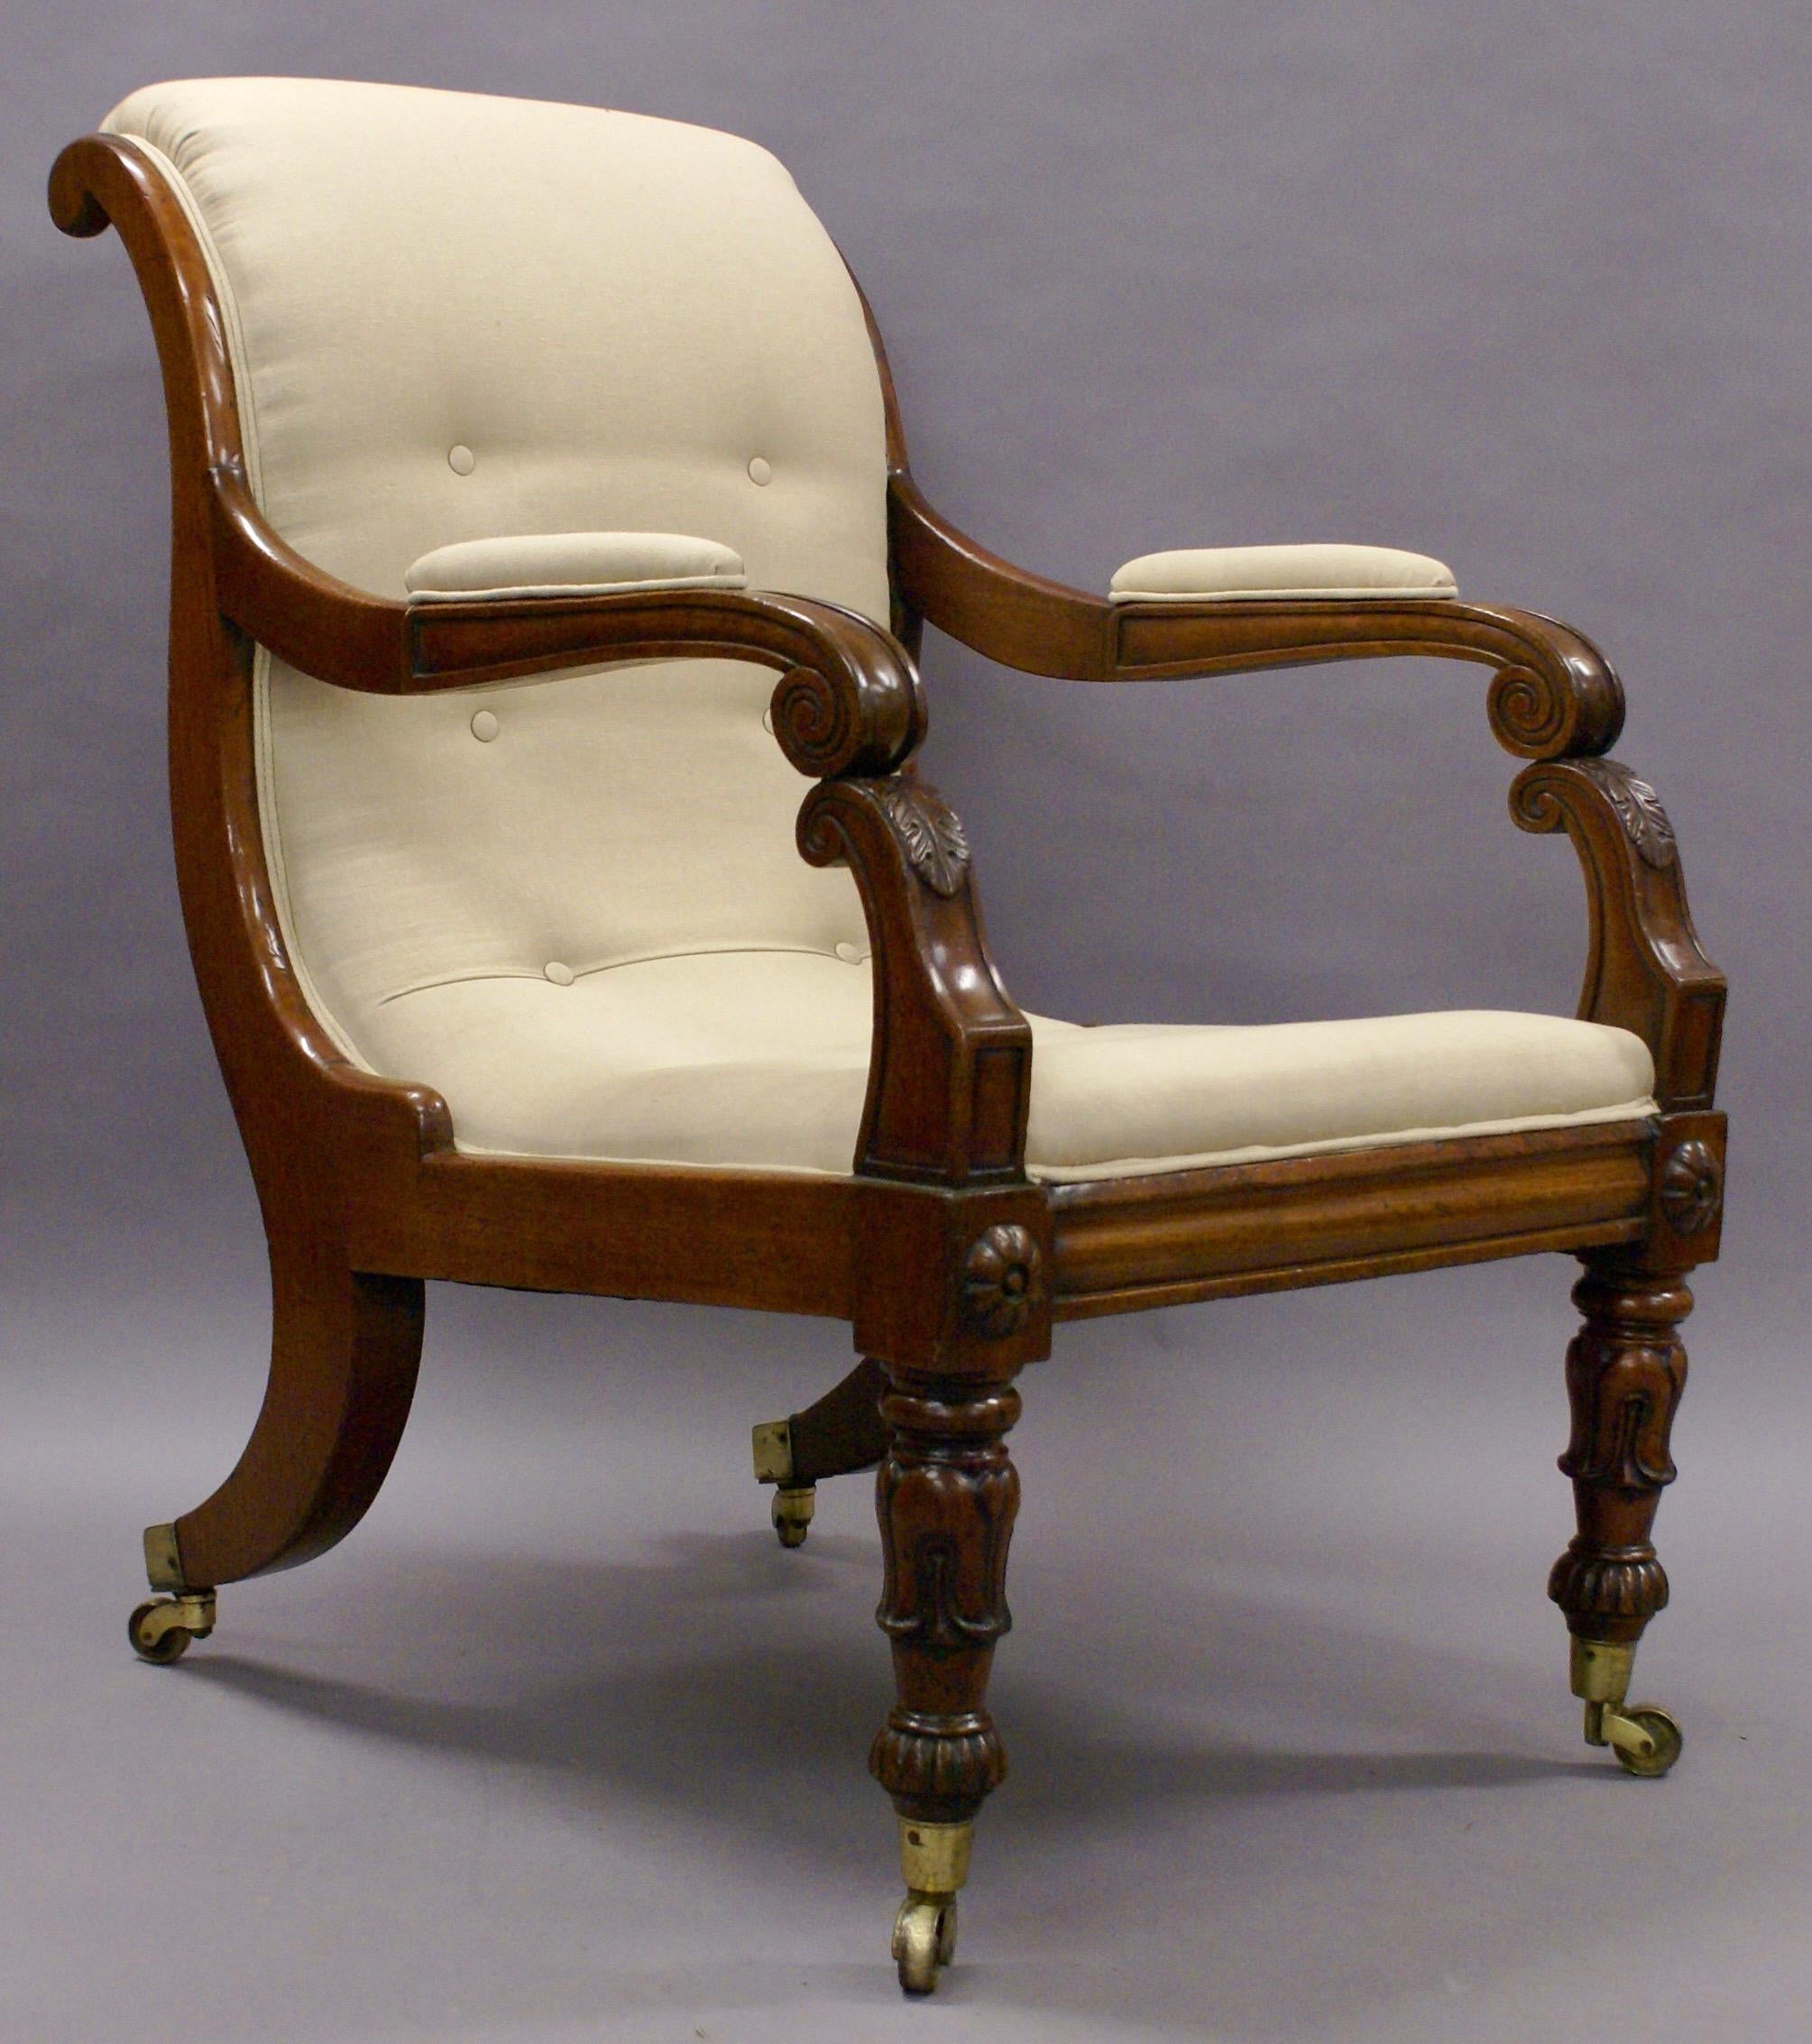 A large later Regency period carved library armchair.
This impressive and elegant armchair is raised on turned and carved front legs and out-swept back legs with original brass castors. The double scroll arms are padded and have carved detail.